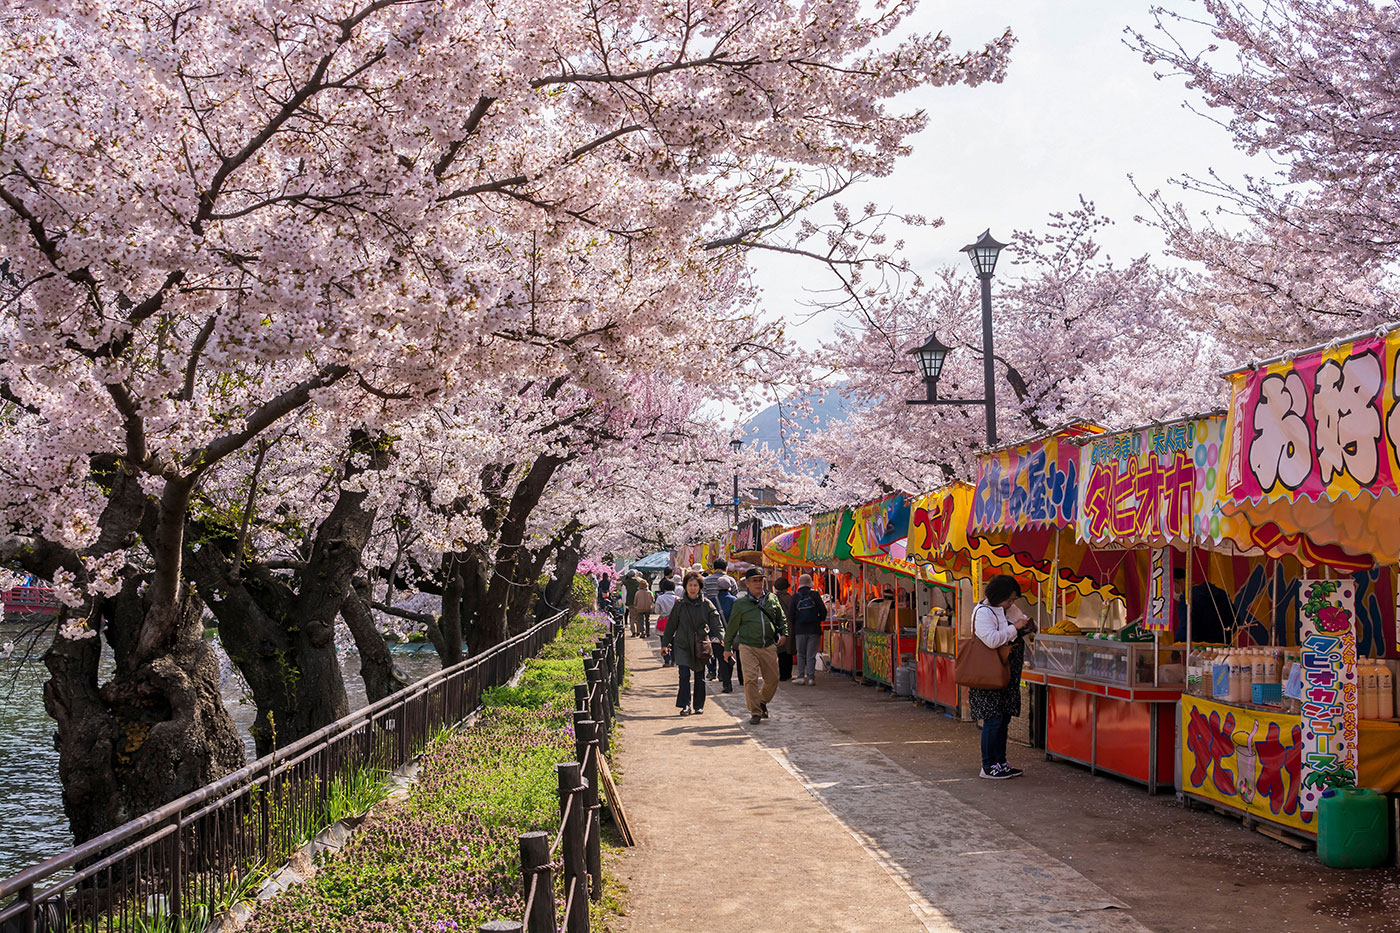 Garyu Park in Nagano, Japan, transforms into a lively hub where visitors savour the beauty of sakura alongside a charming market along the river